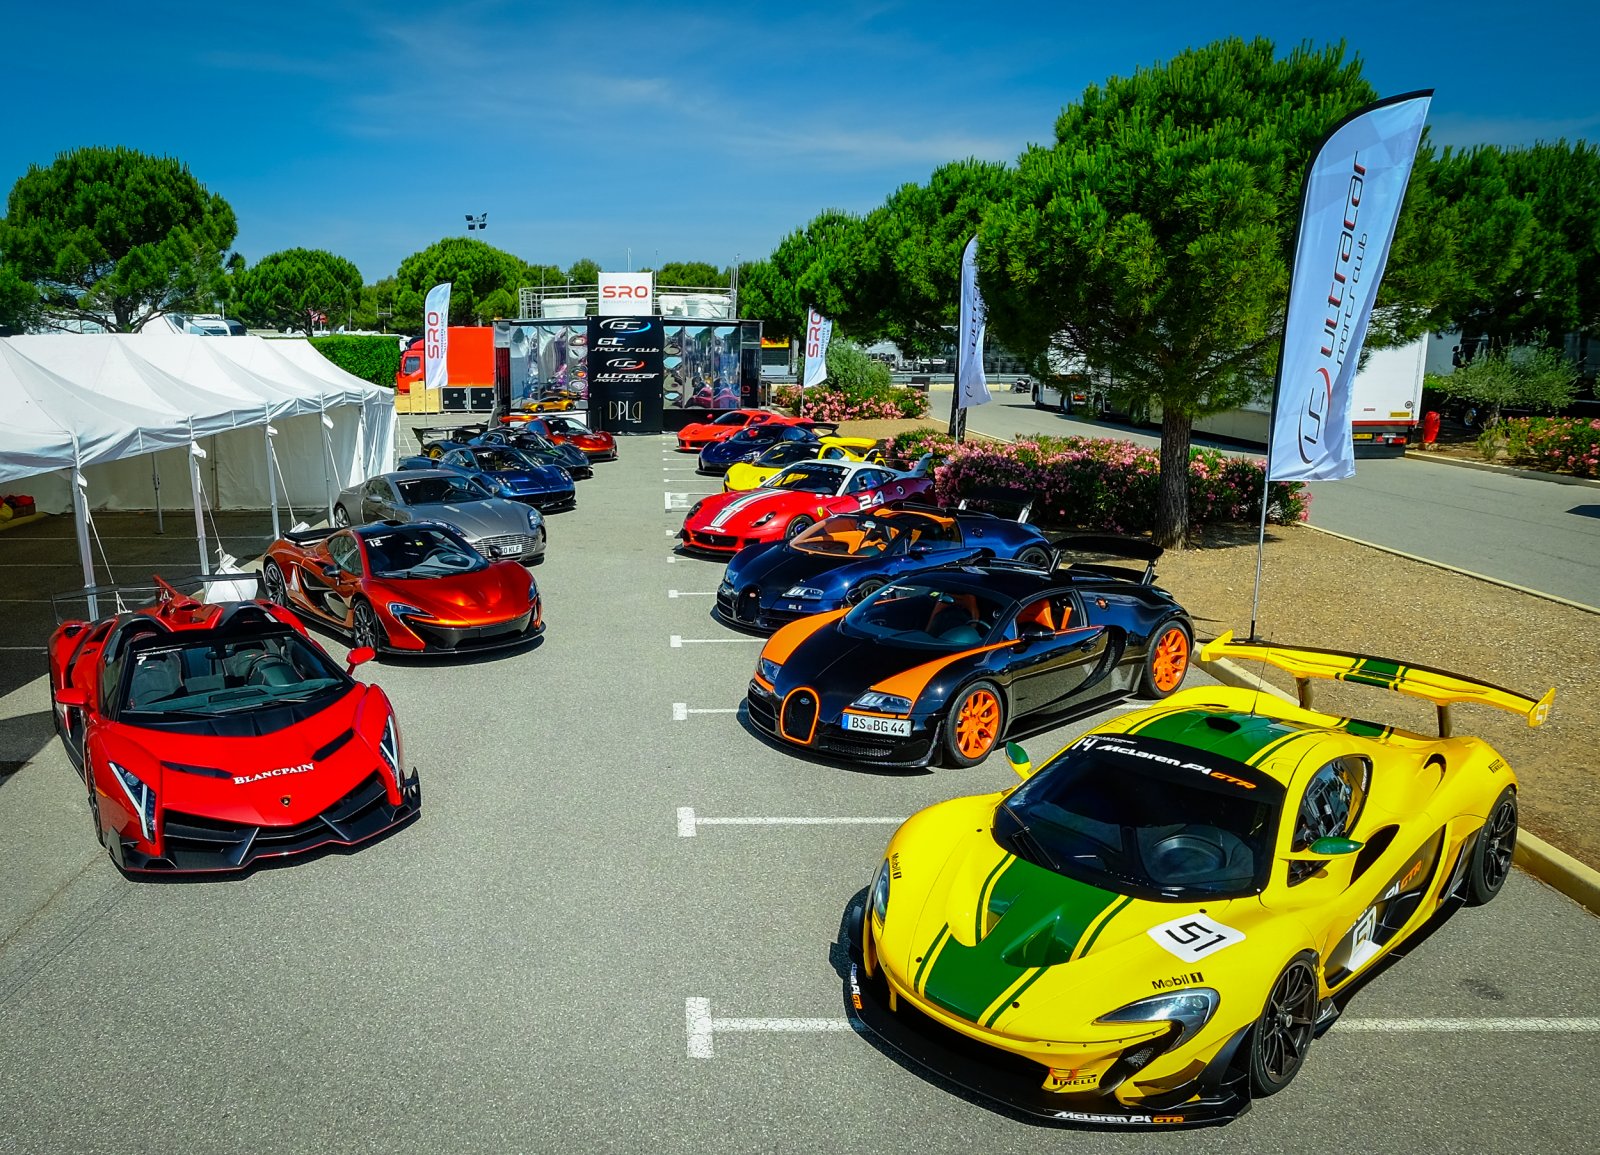 Magnificent Ultracars add extra glamour to the Circuit Paul Ricard weekend